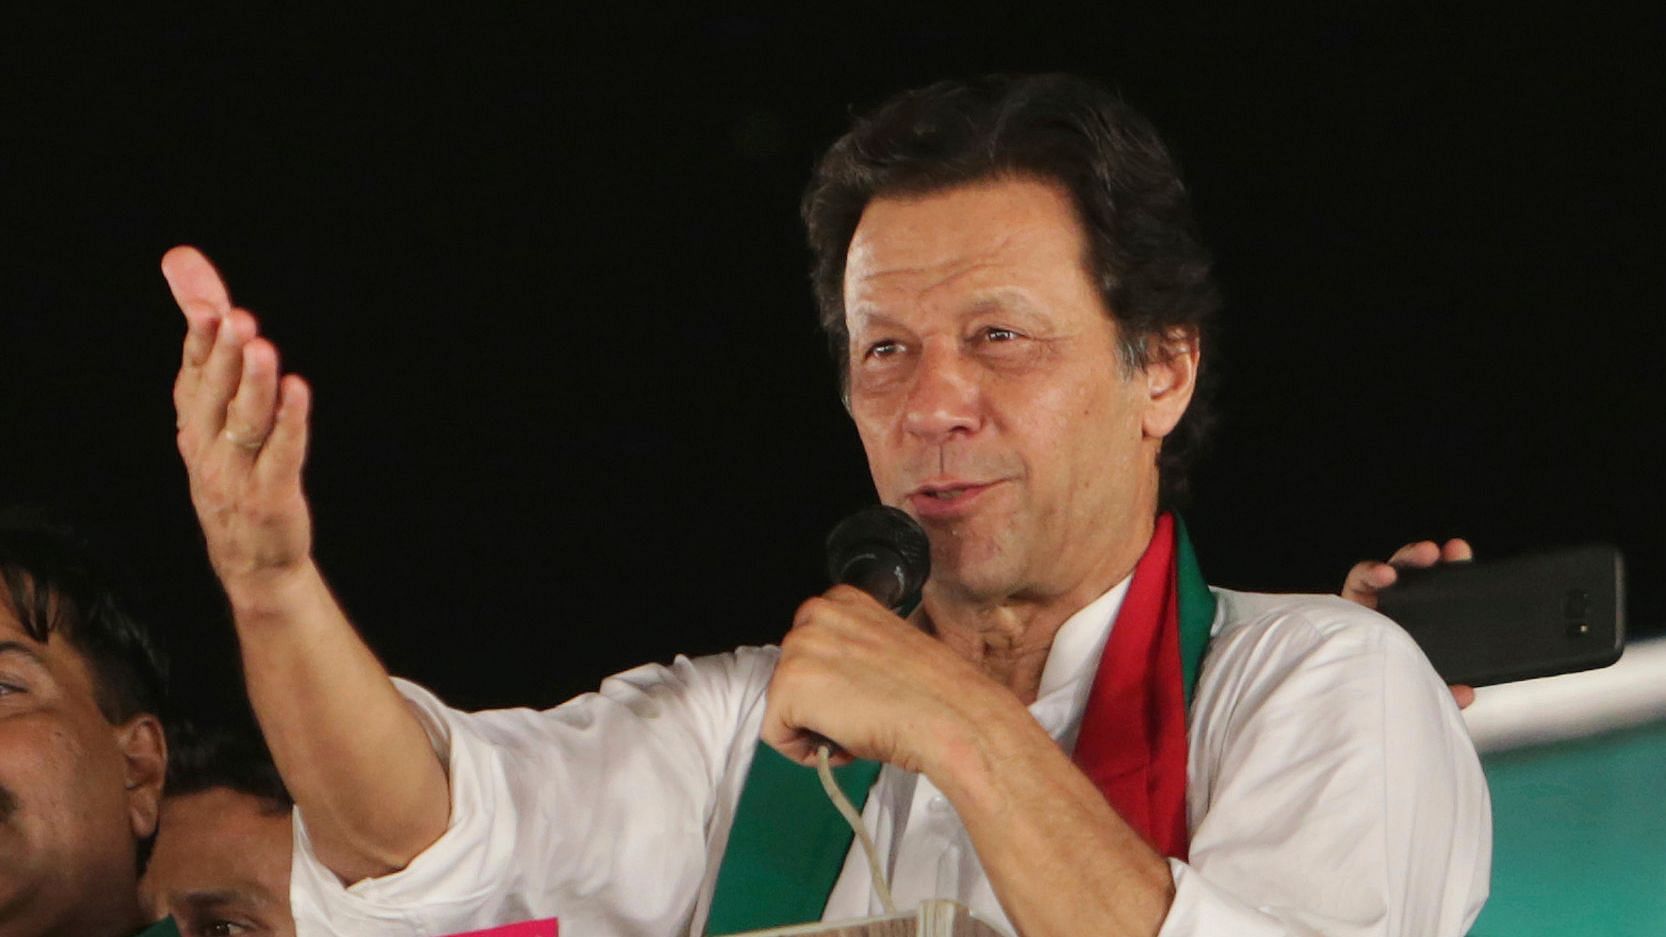 “I have decided that I will improve this Pakistan team. I am going to reform Pakistan cricket,” said Imran Khan.